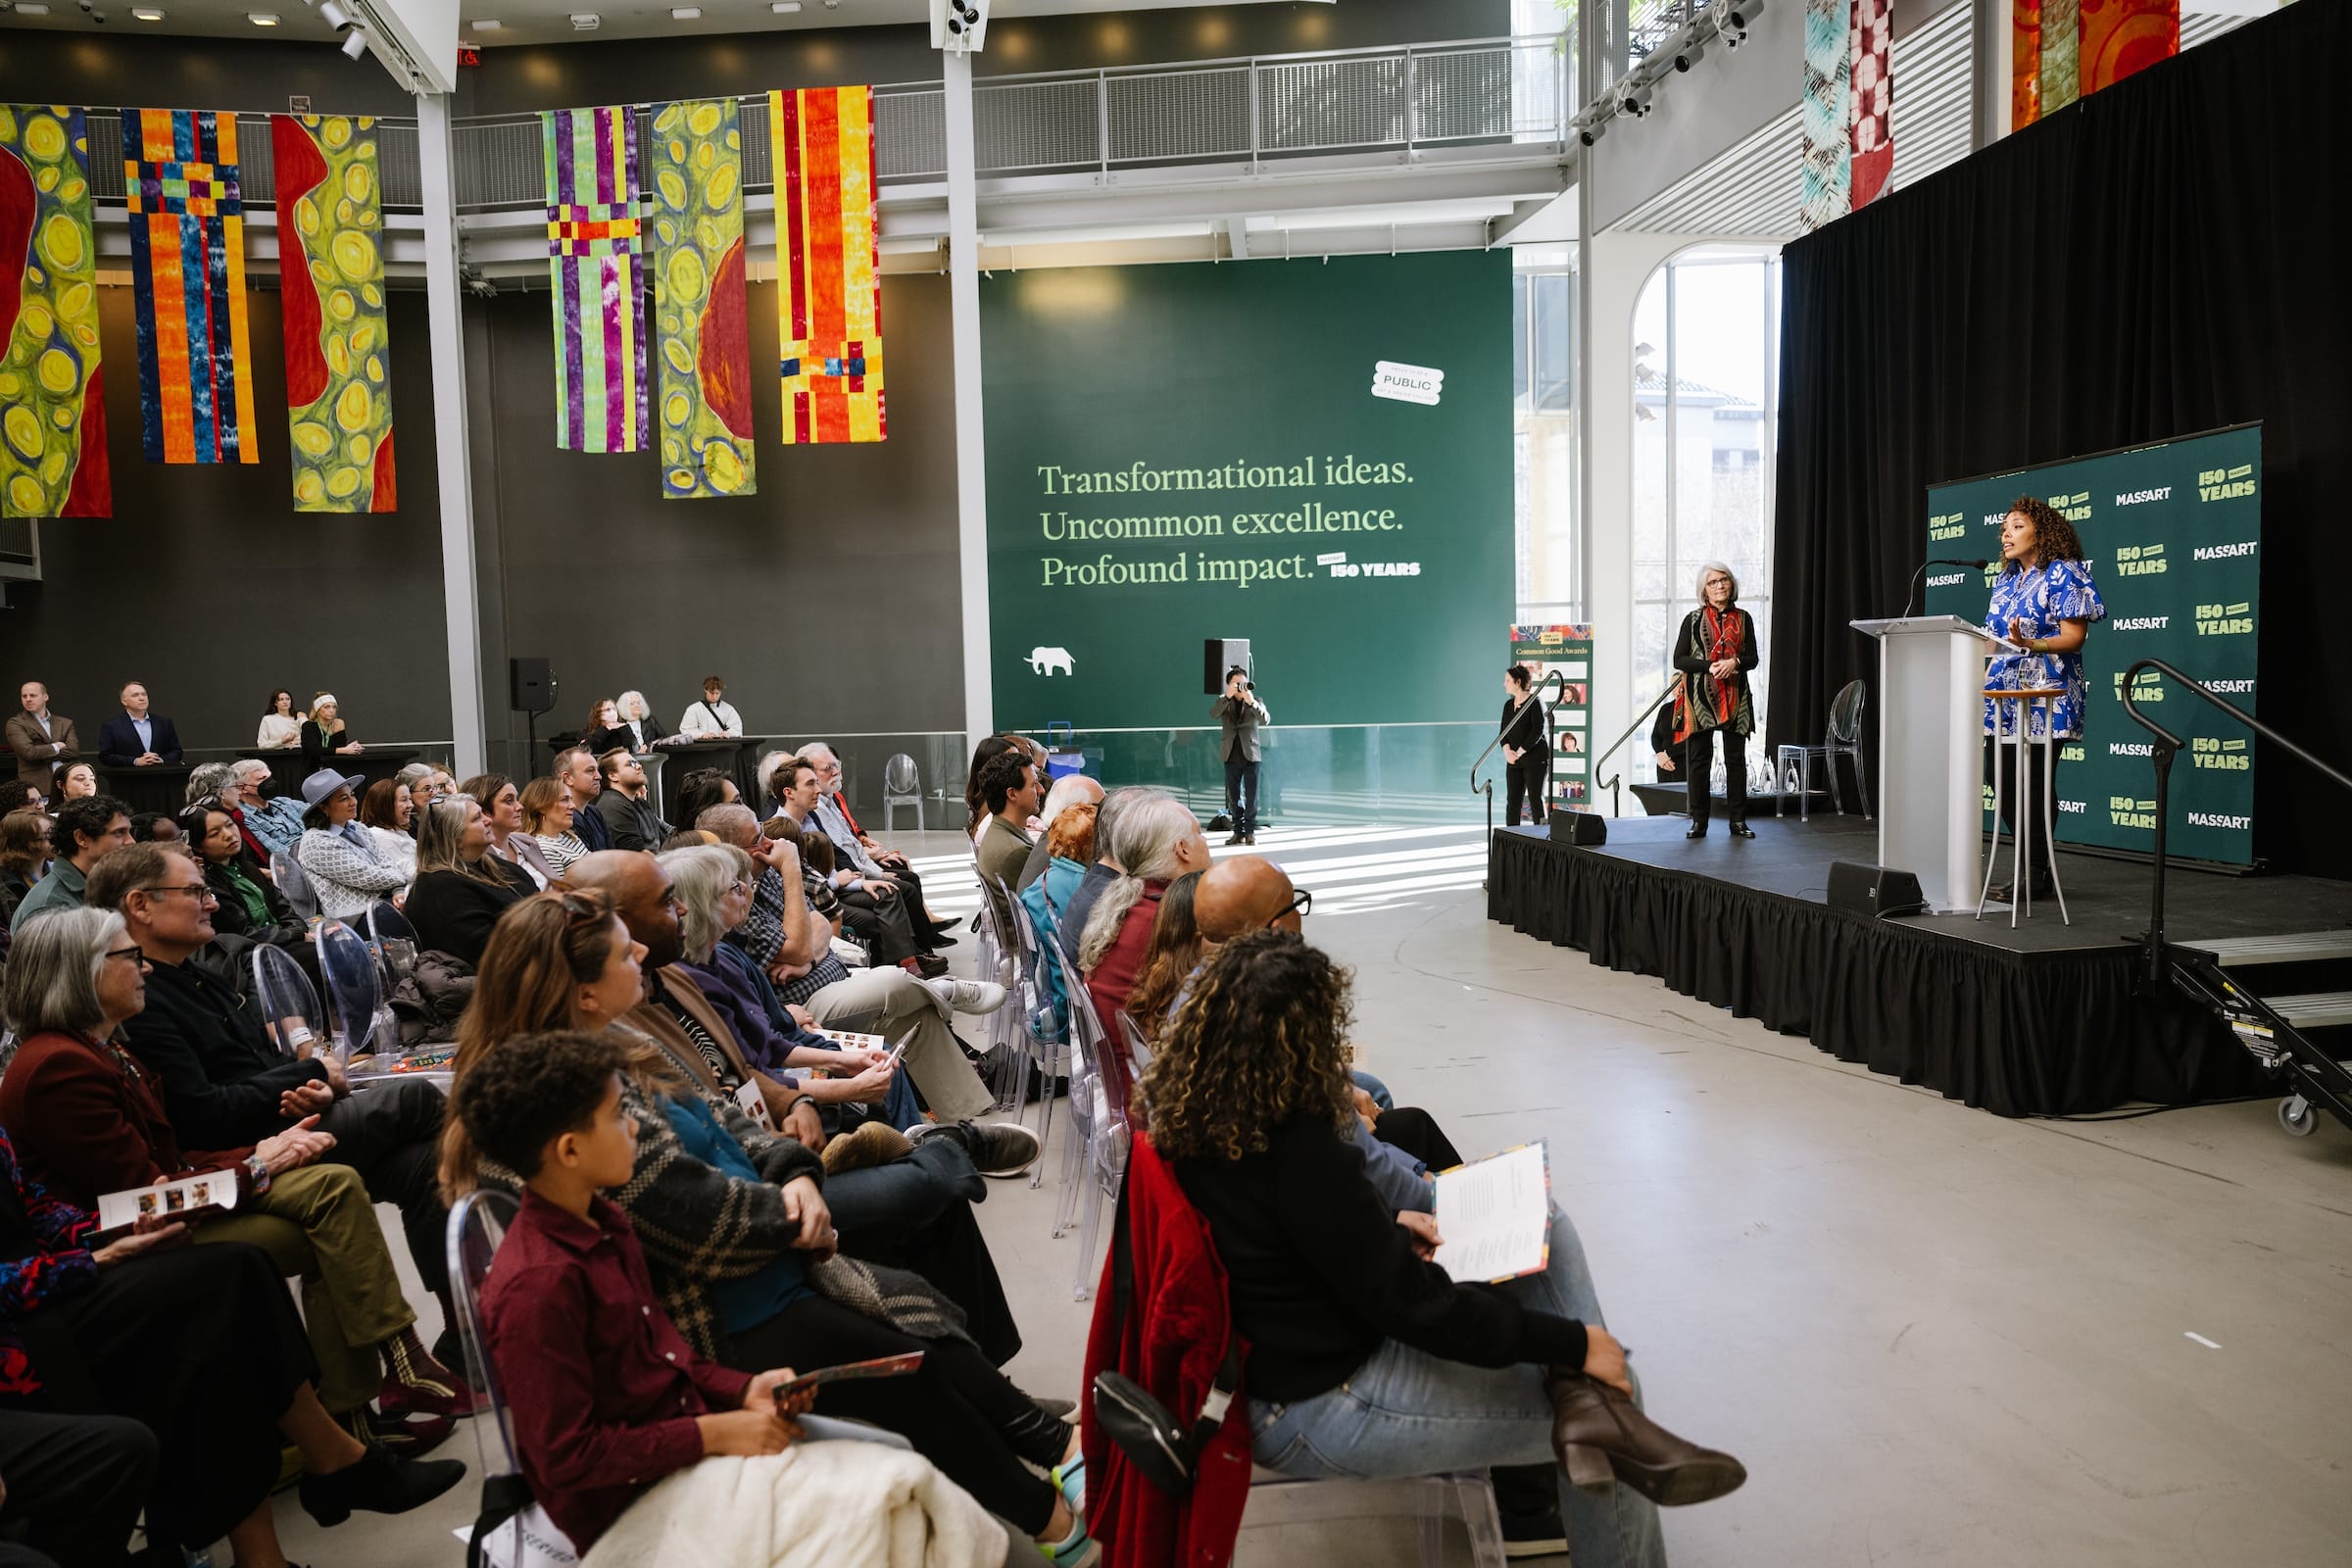 A woman stands at a pedestal on a stage while talking to an audience full of people in MassArt's Design and Media Center Atrium.